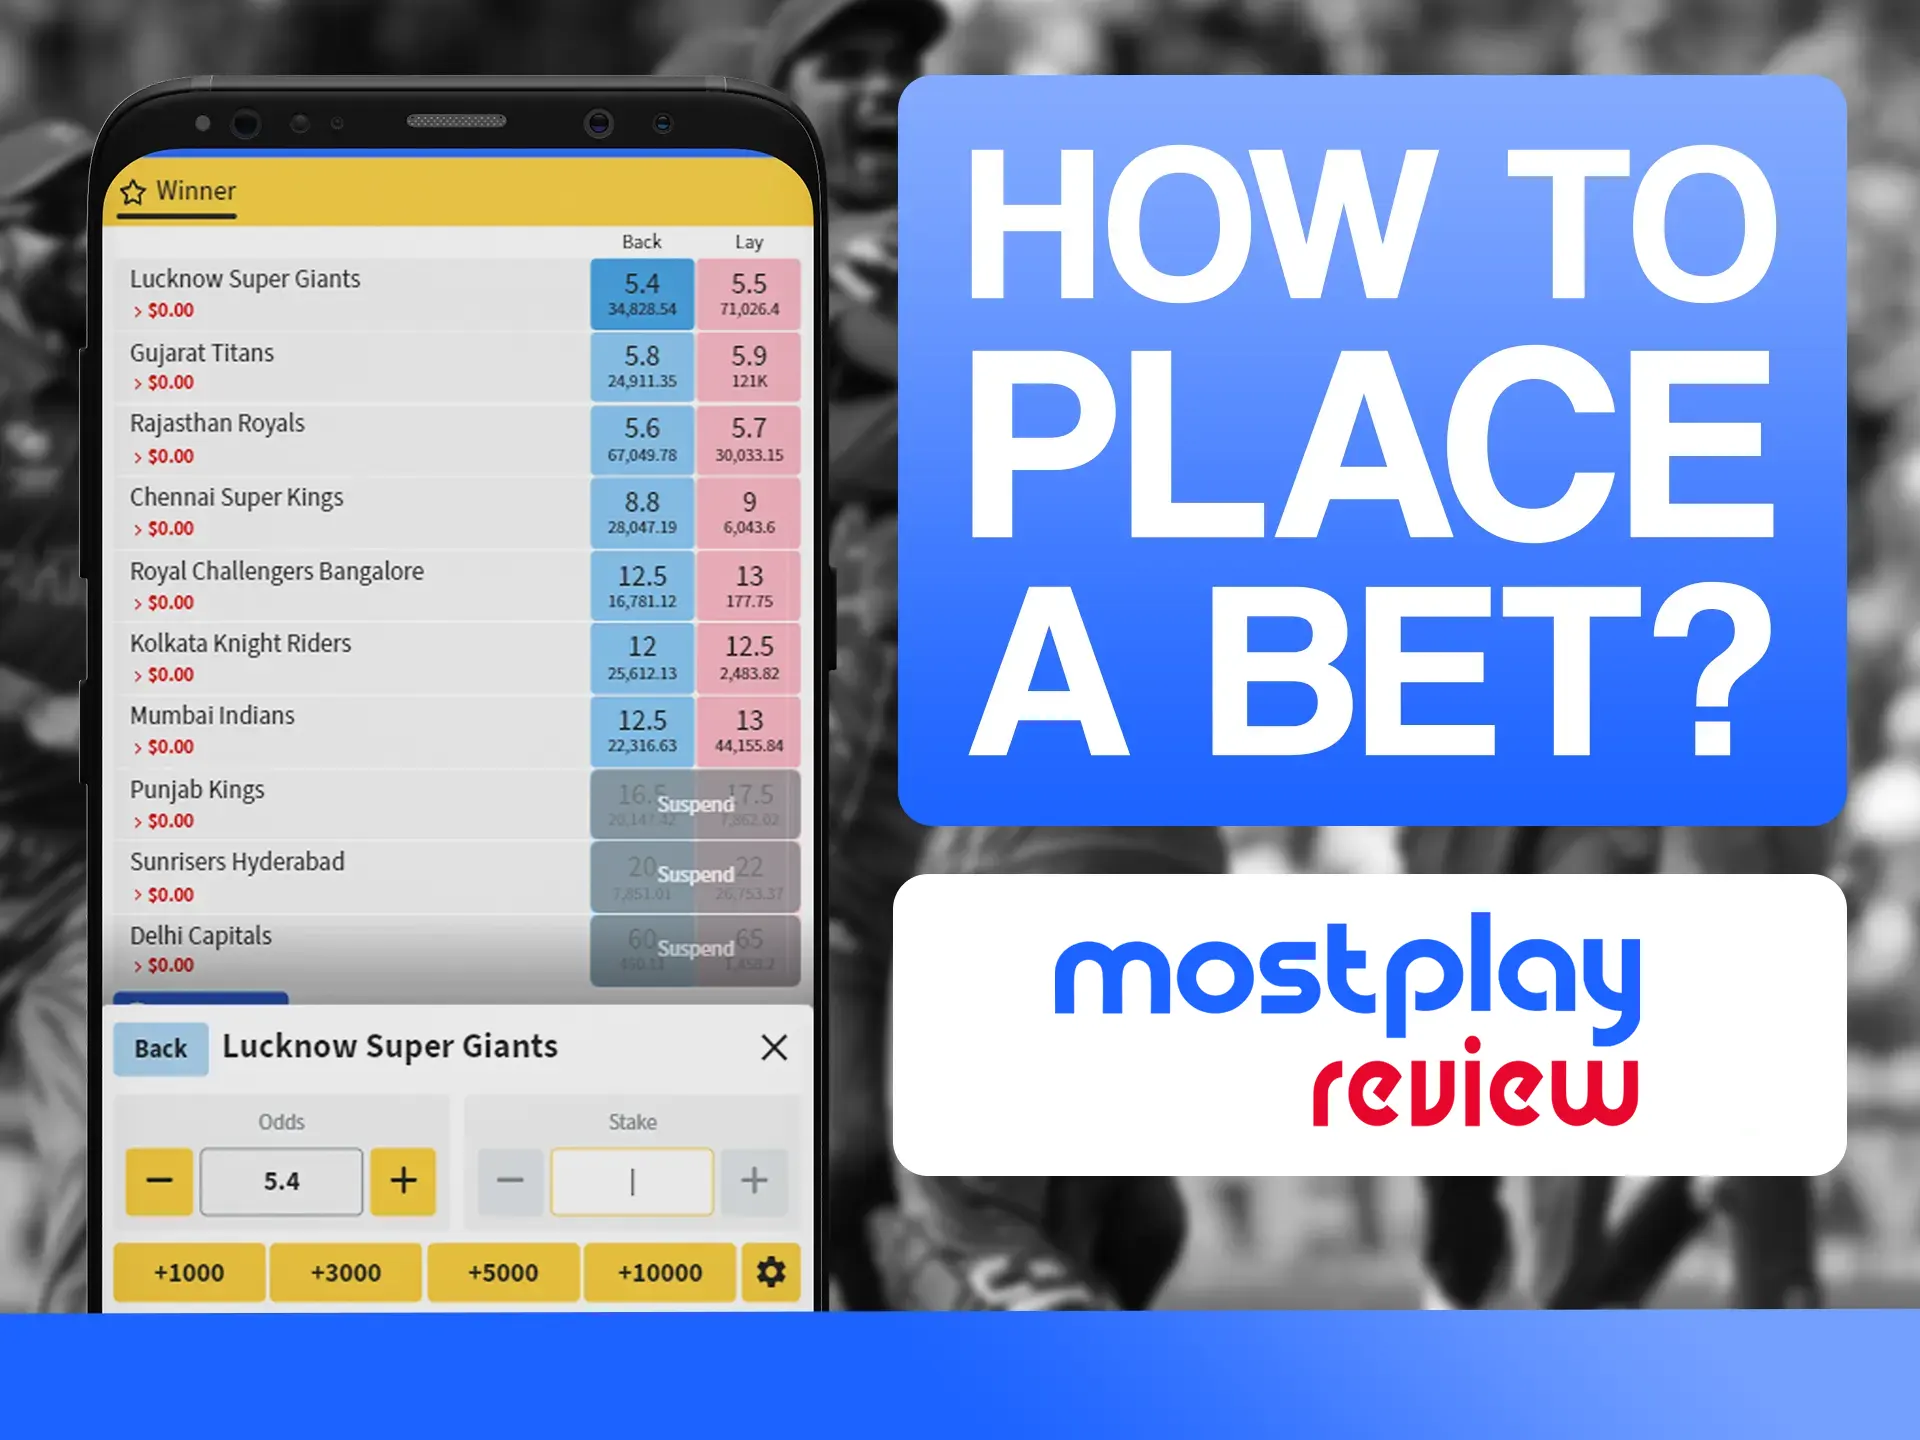 It's easy to place bets at Mostplay.